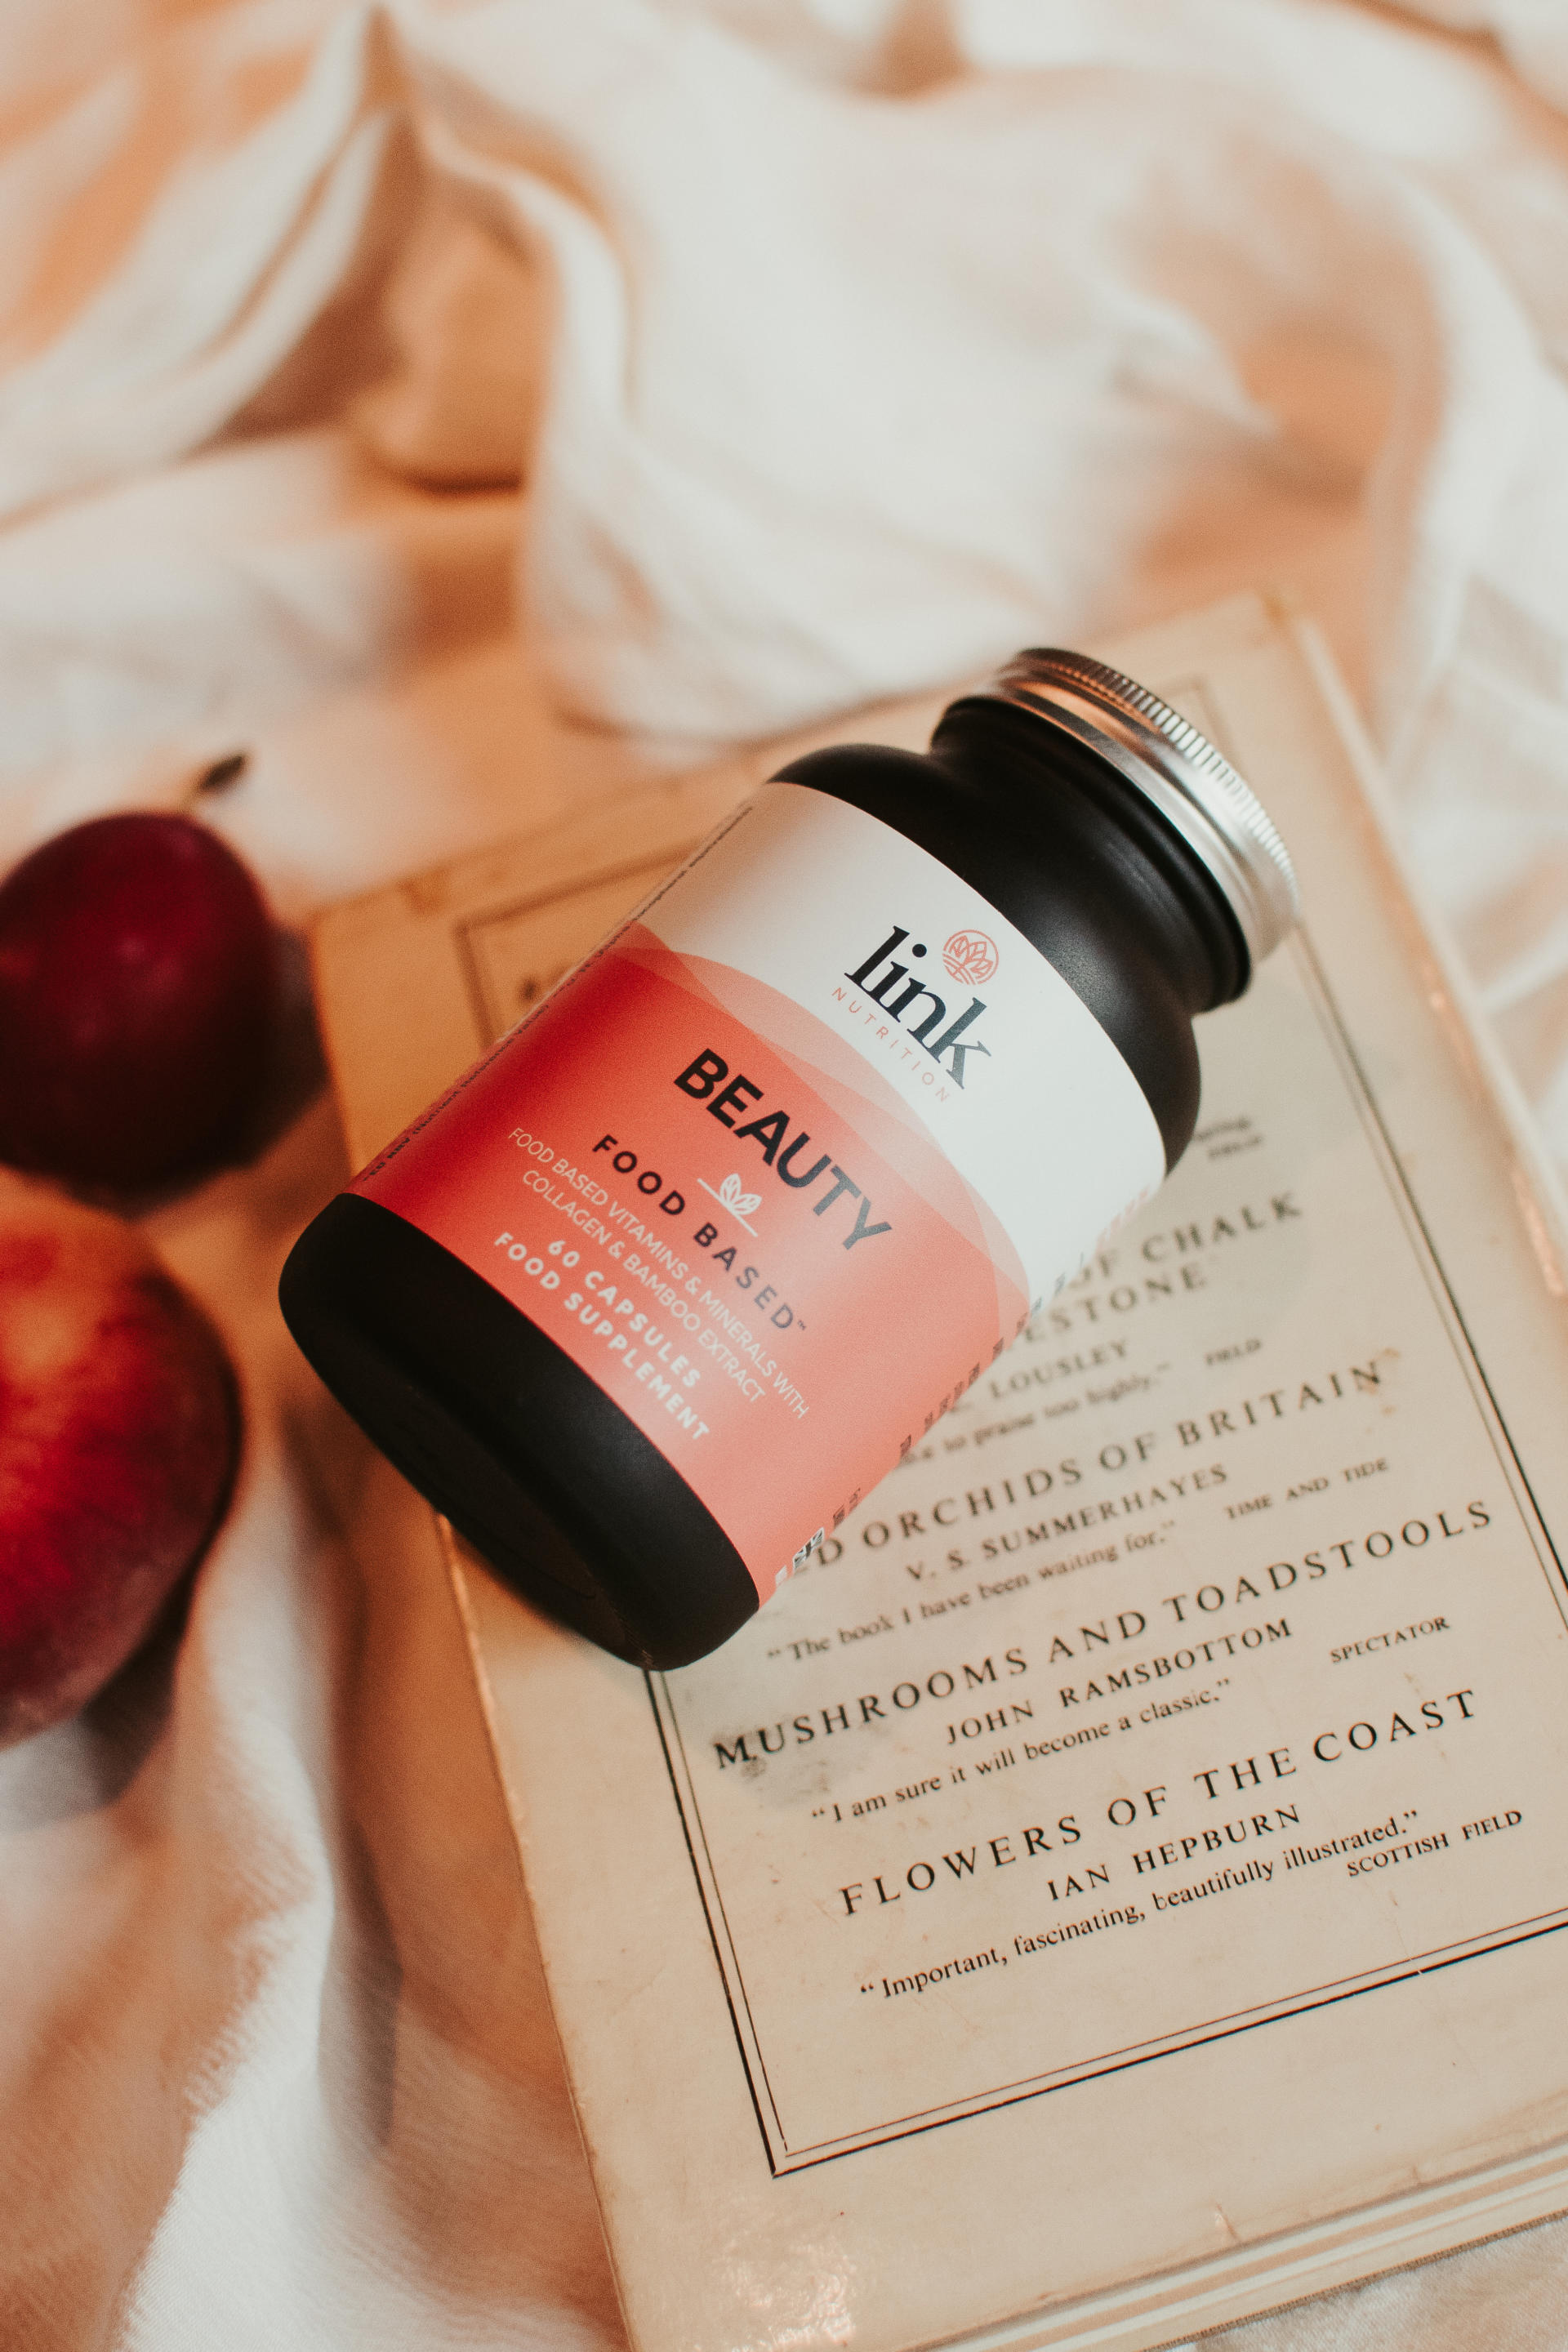 Beauty complex Food Based Supplements from Link Nutrition